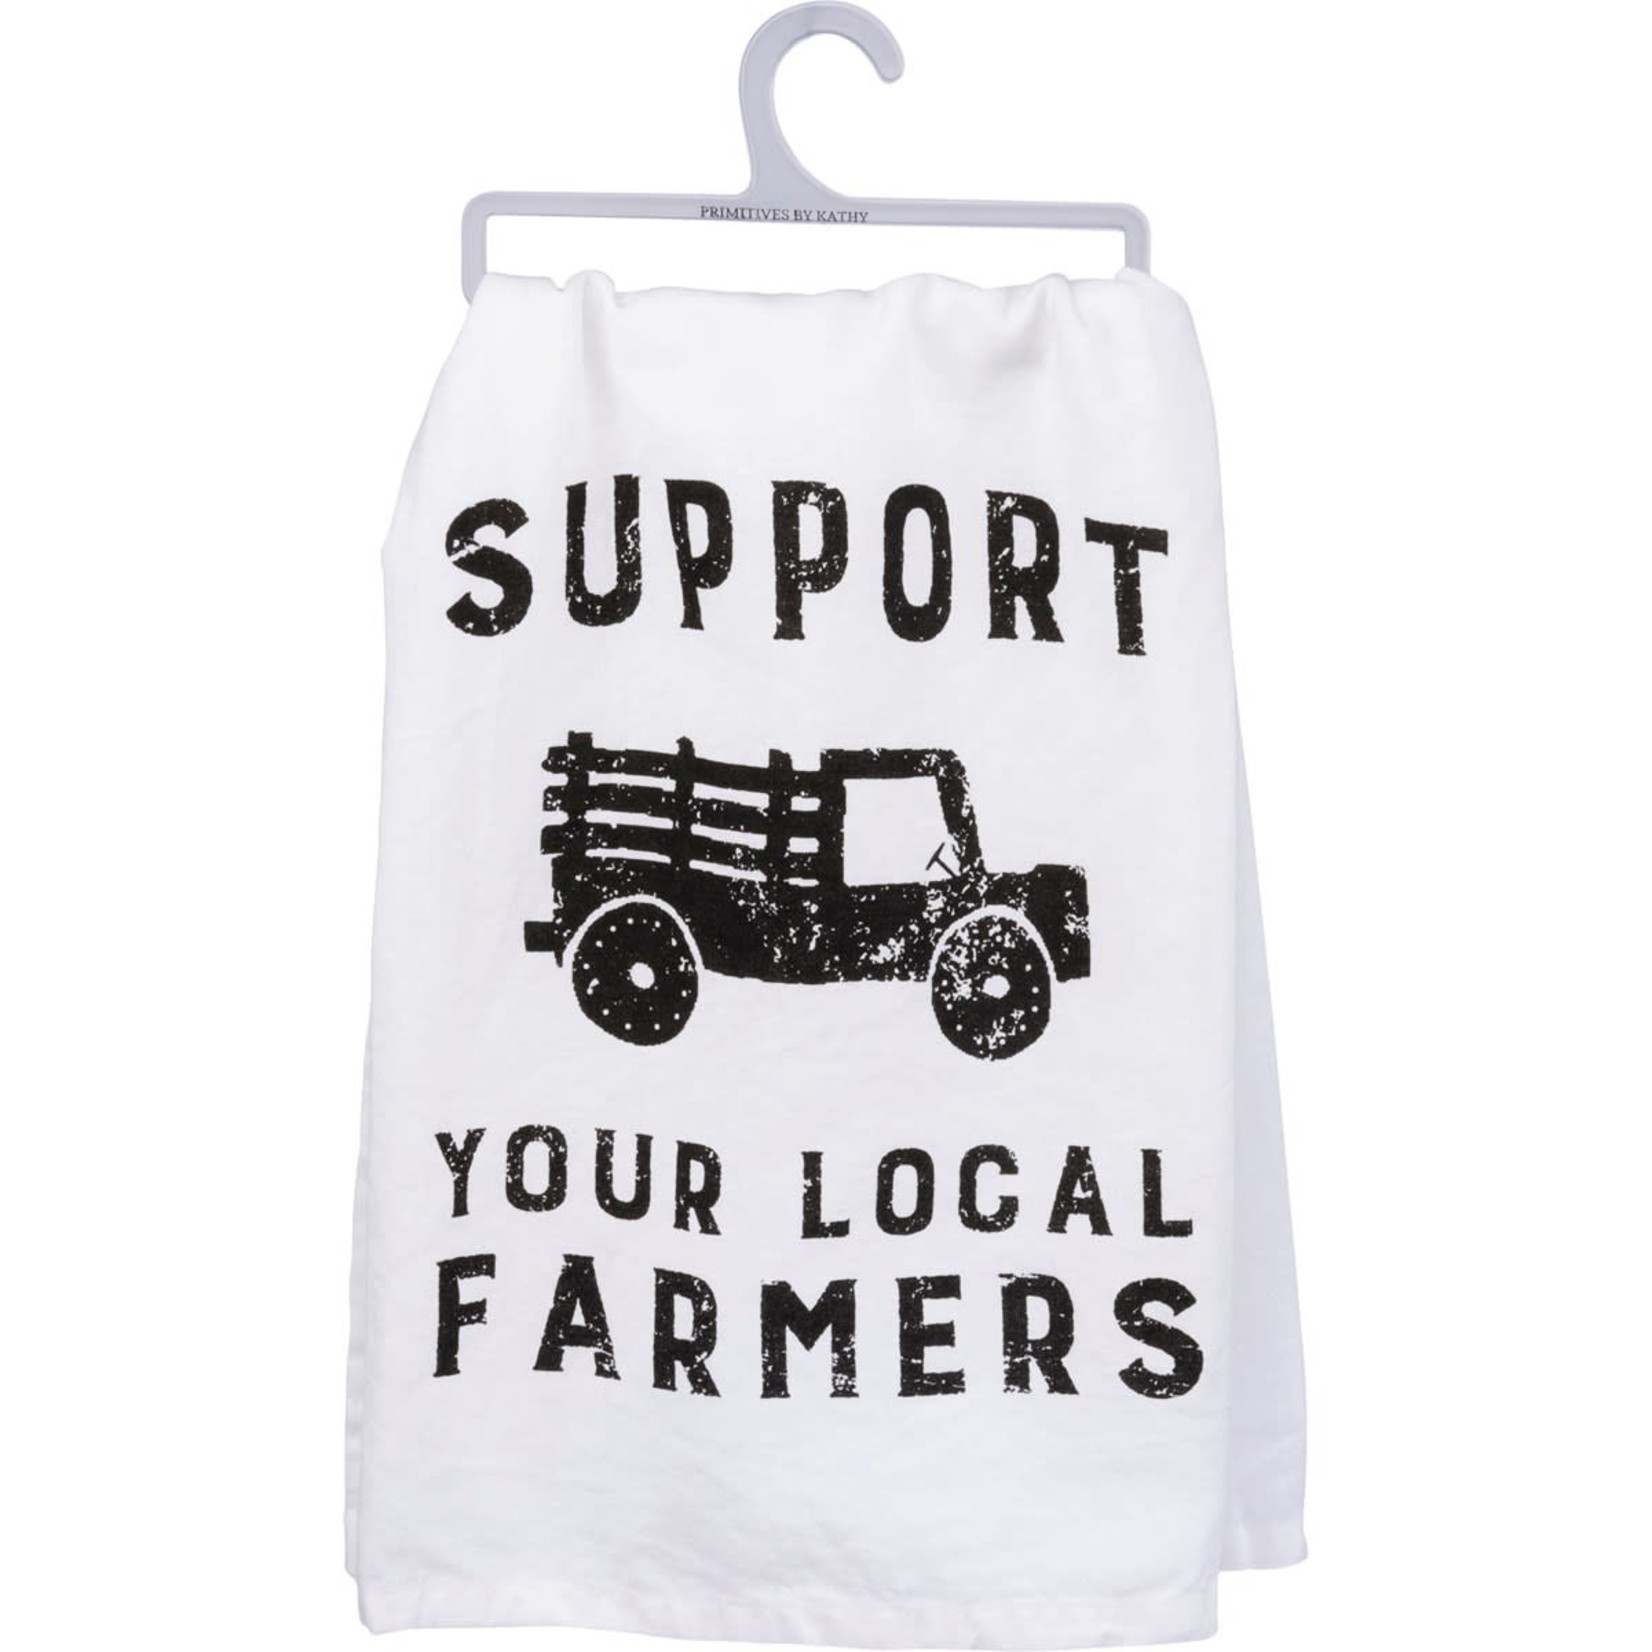 PRIMITIVES BY KATHY LOCAL FARMERS KITCHEN TOWEL